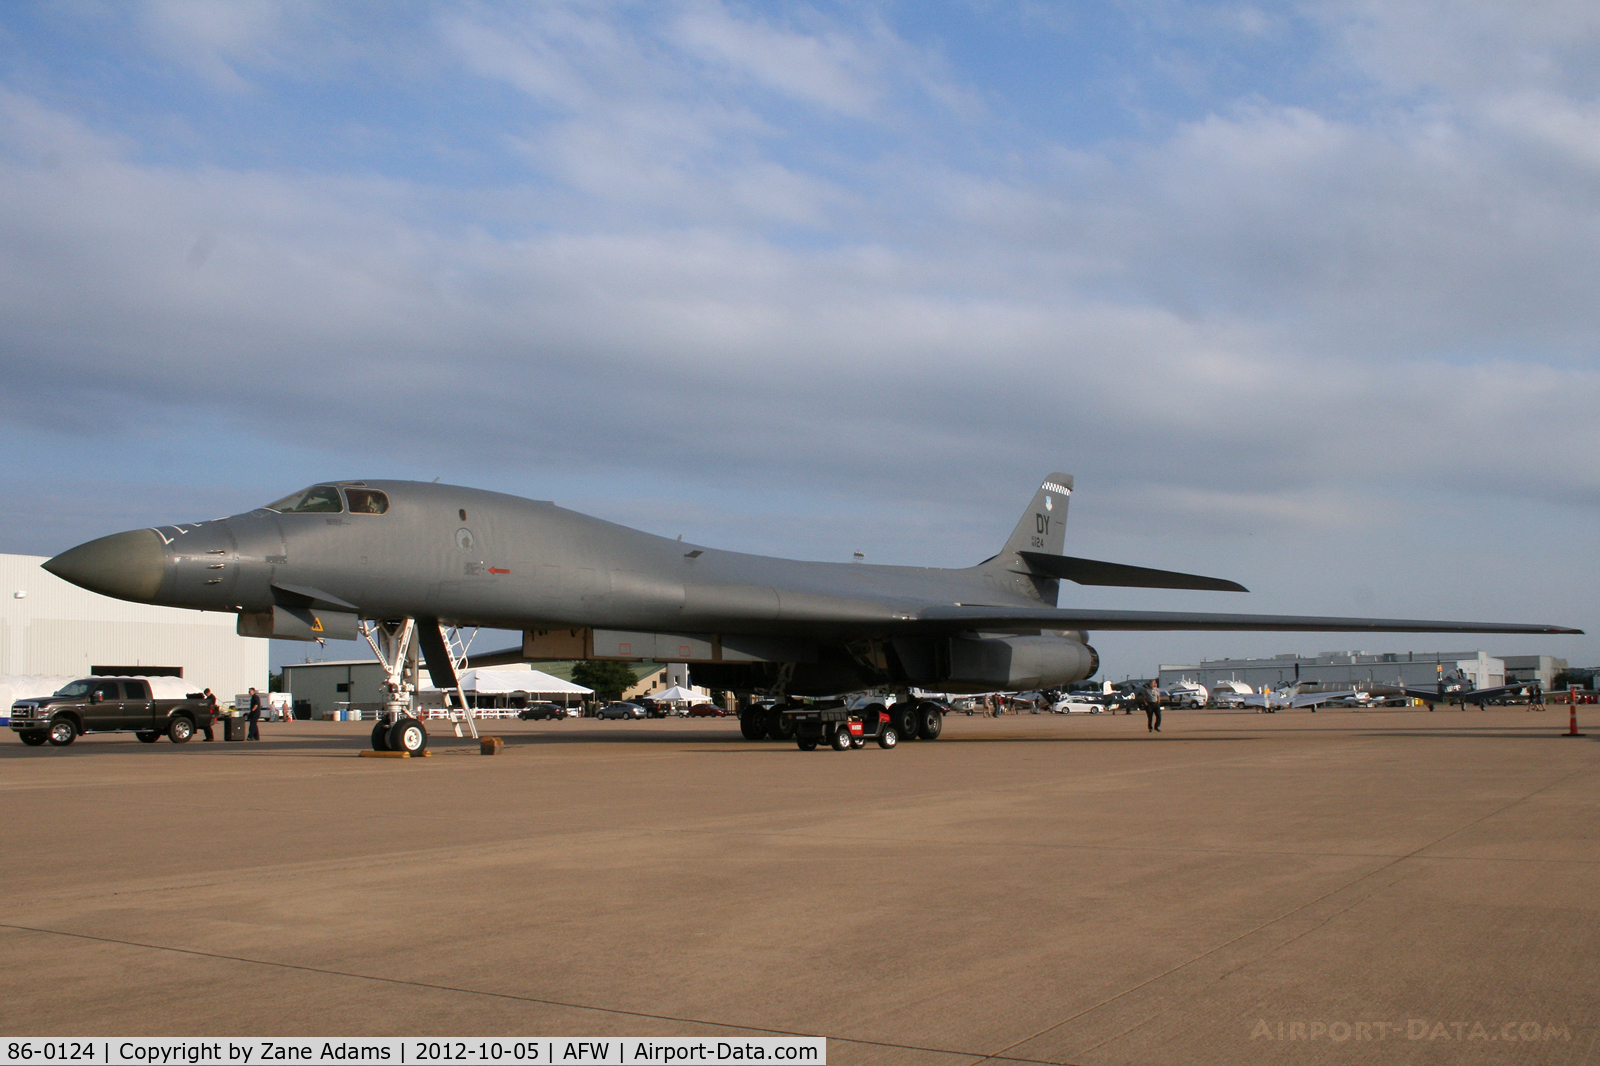 86-0124, 1986 Rockwell B-1B Lancer C/N 84, At the 2012 Alliance Airshow - Fort Worth, TX